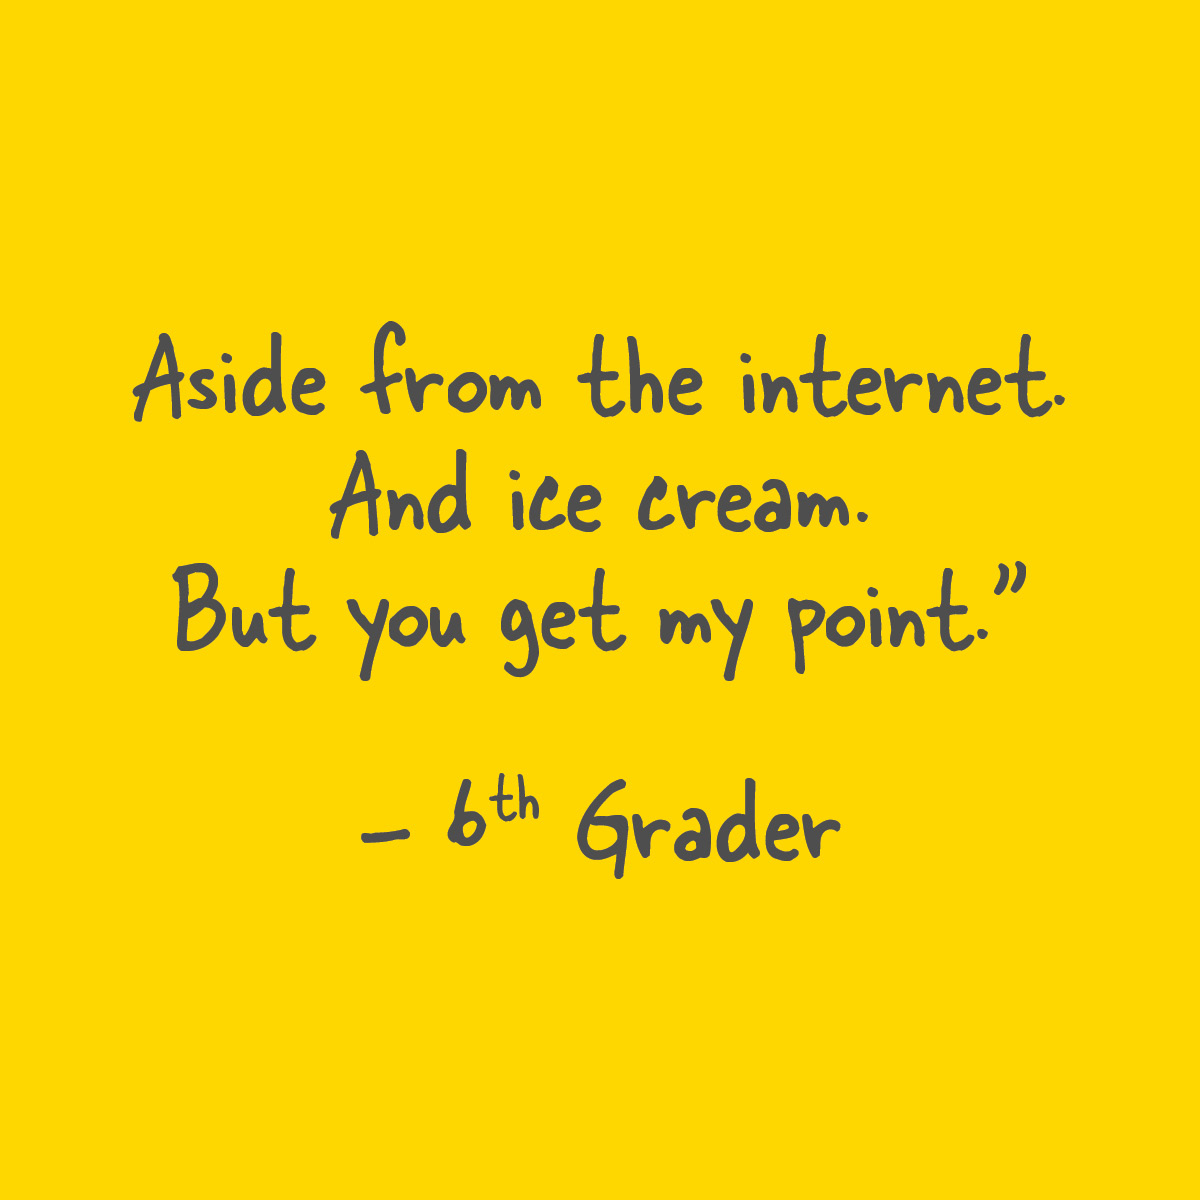 Aside from the internet. And Ice Cream. But you get my point. - 6th grader